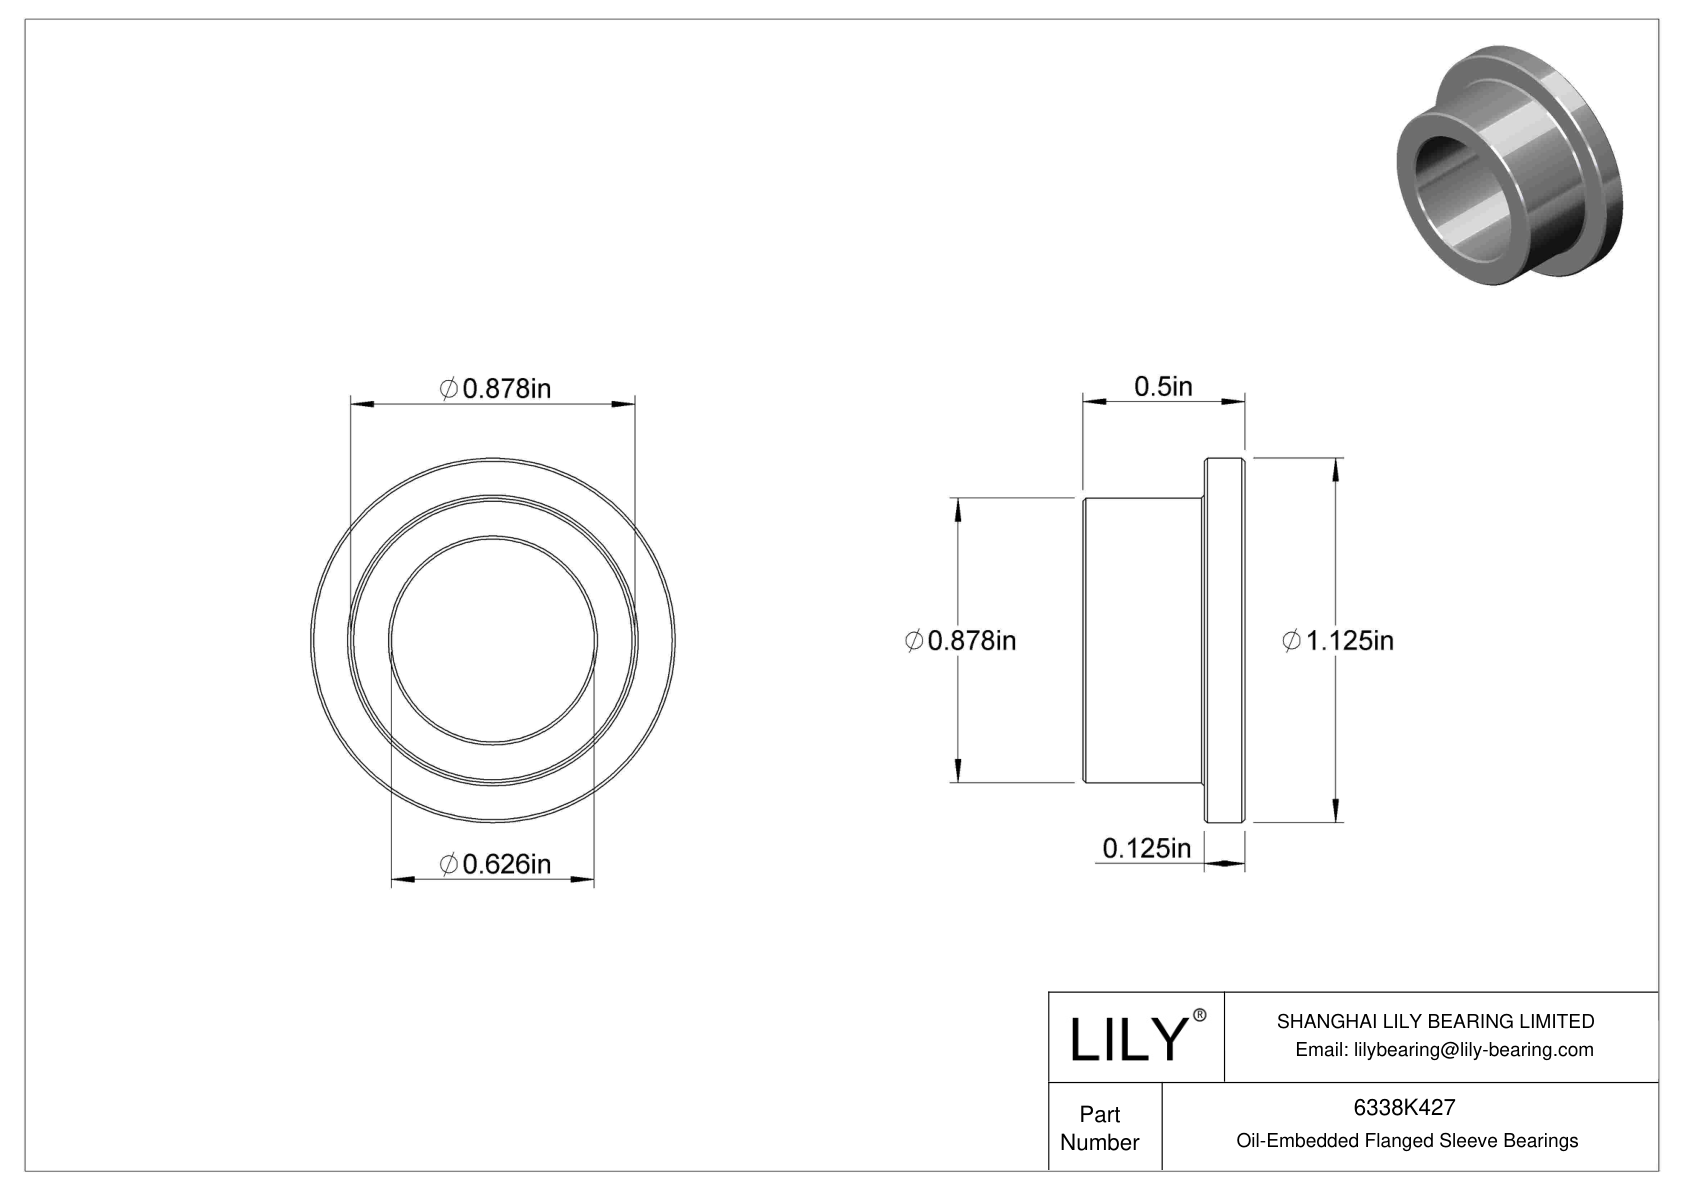 GDDIKECH Oil-Embedded Flanged Sleeve Bearings cad drawing